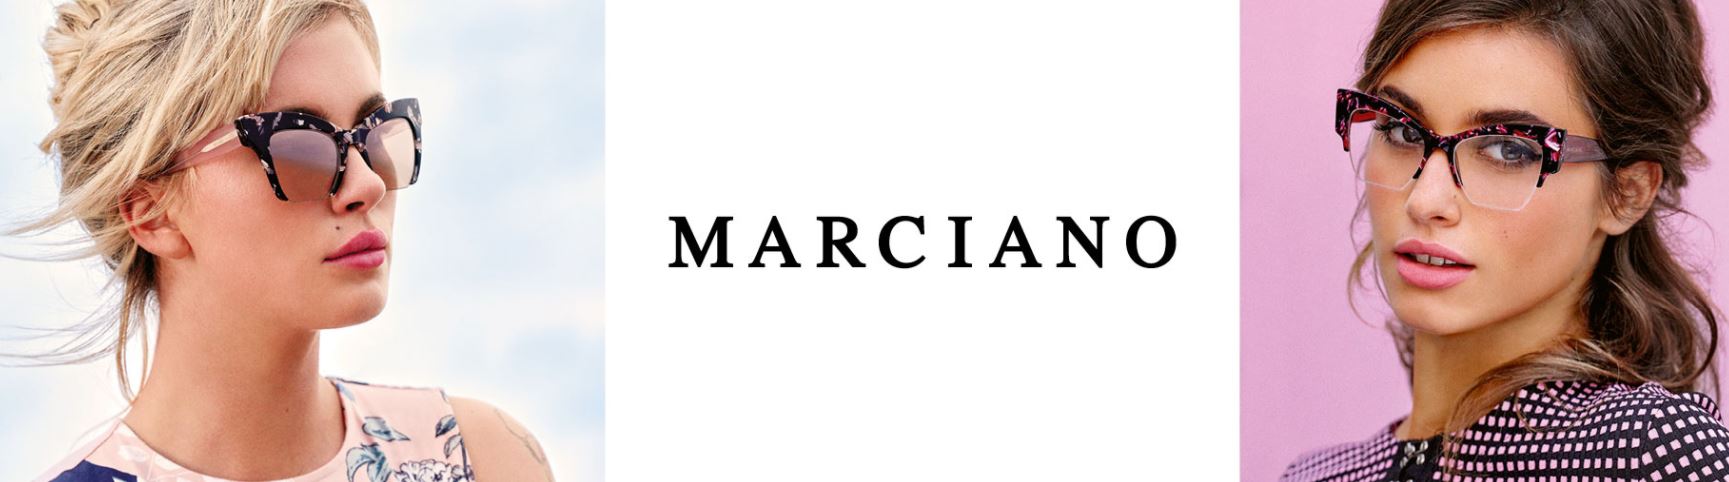 Marciano by Guess | Marciano Eyeglasses & Sunglasses